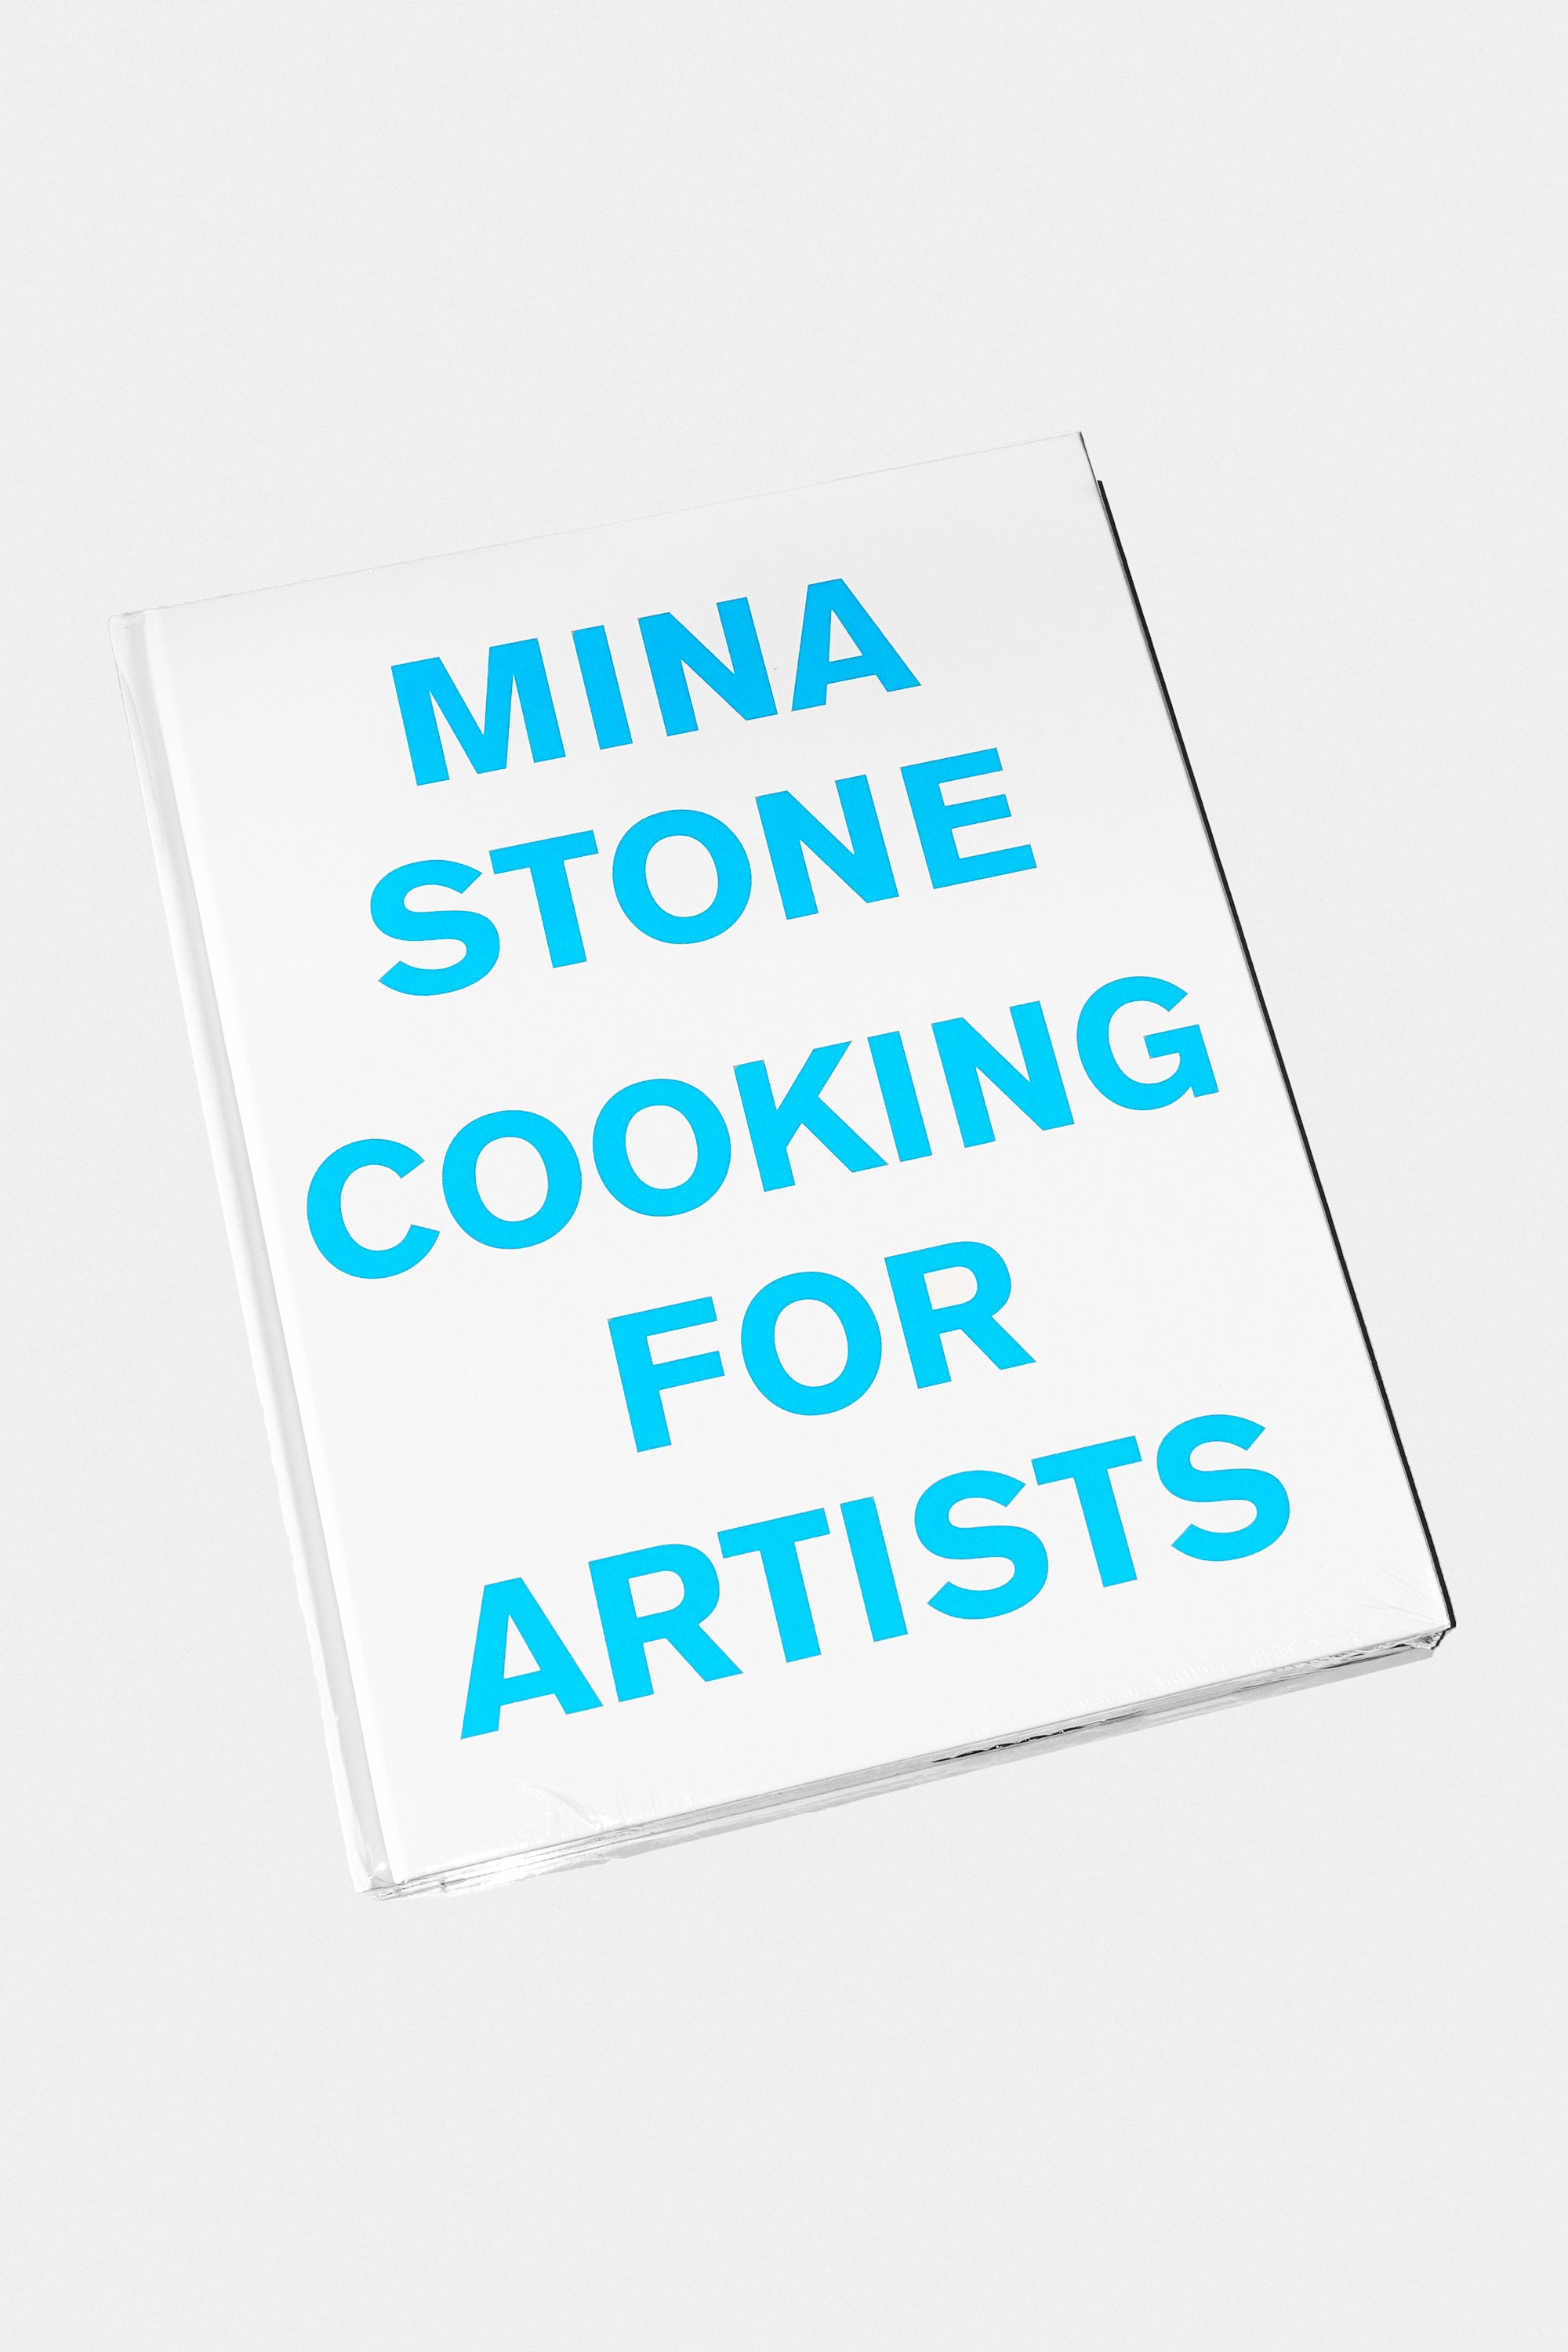 Cooking for Artists